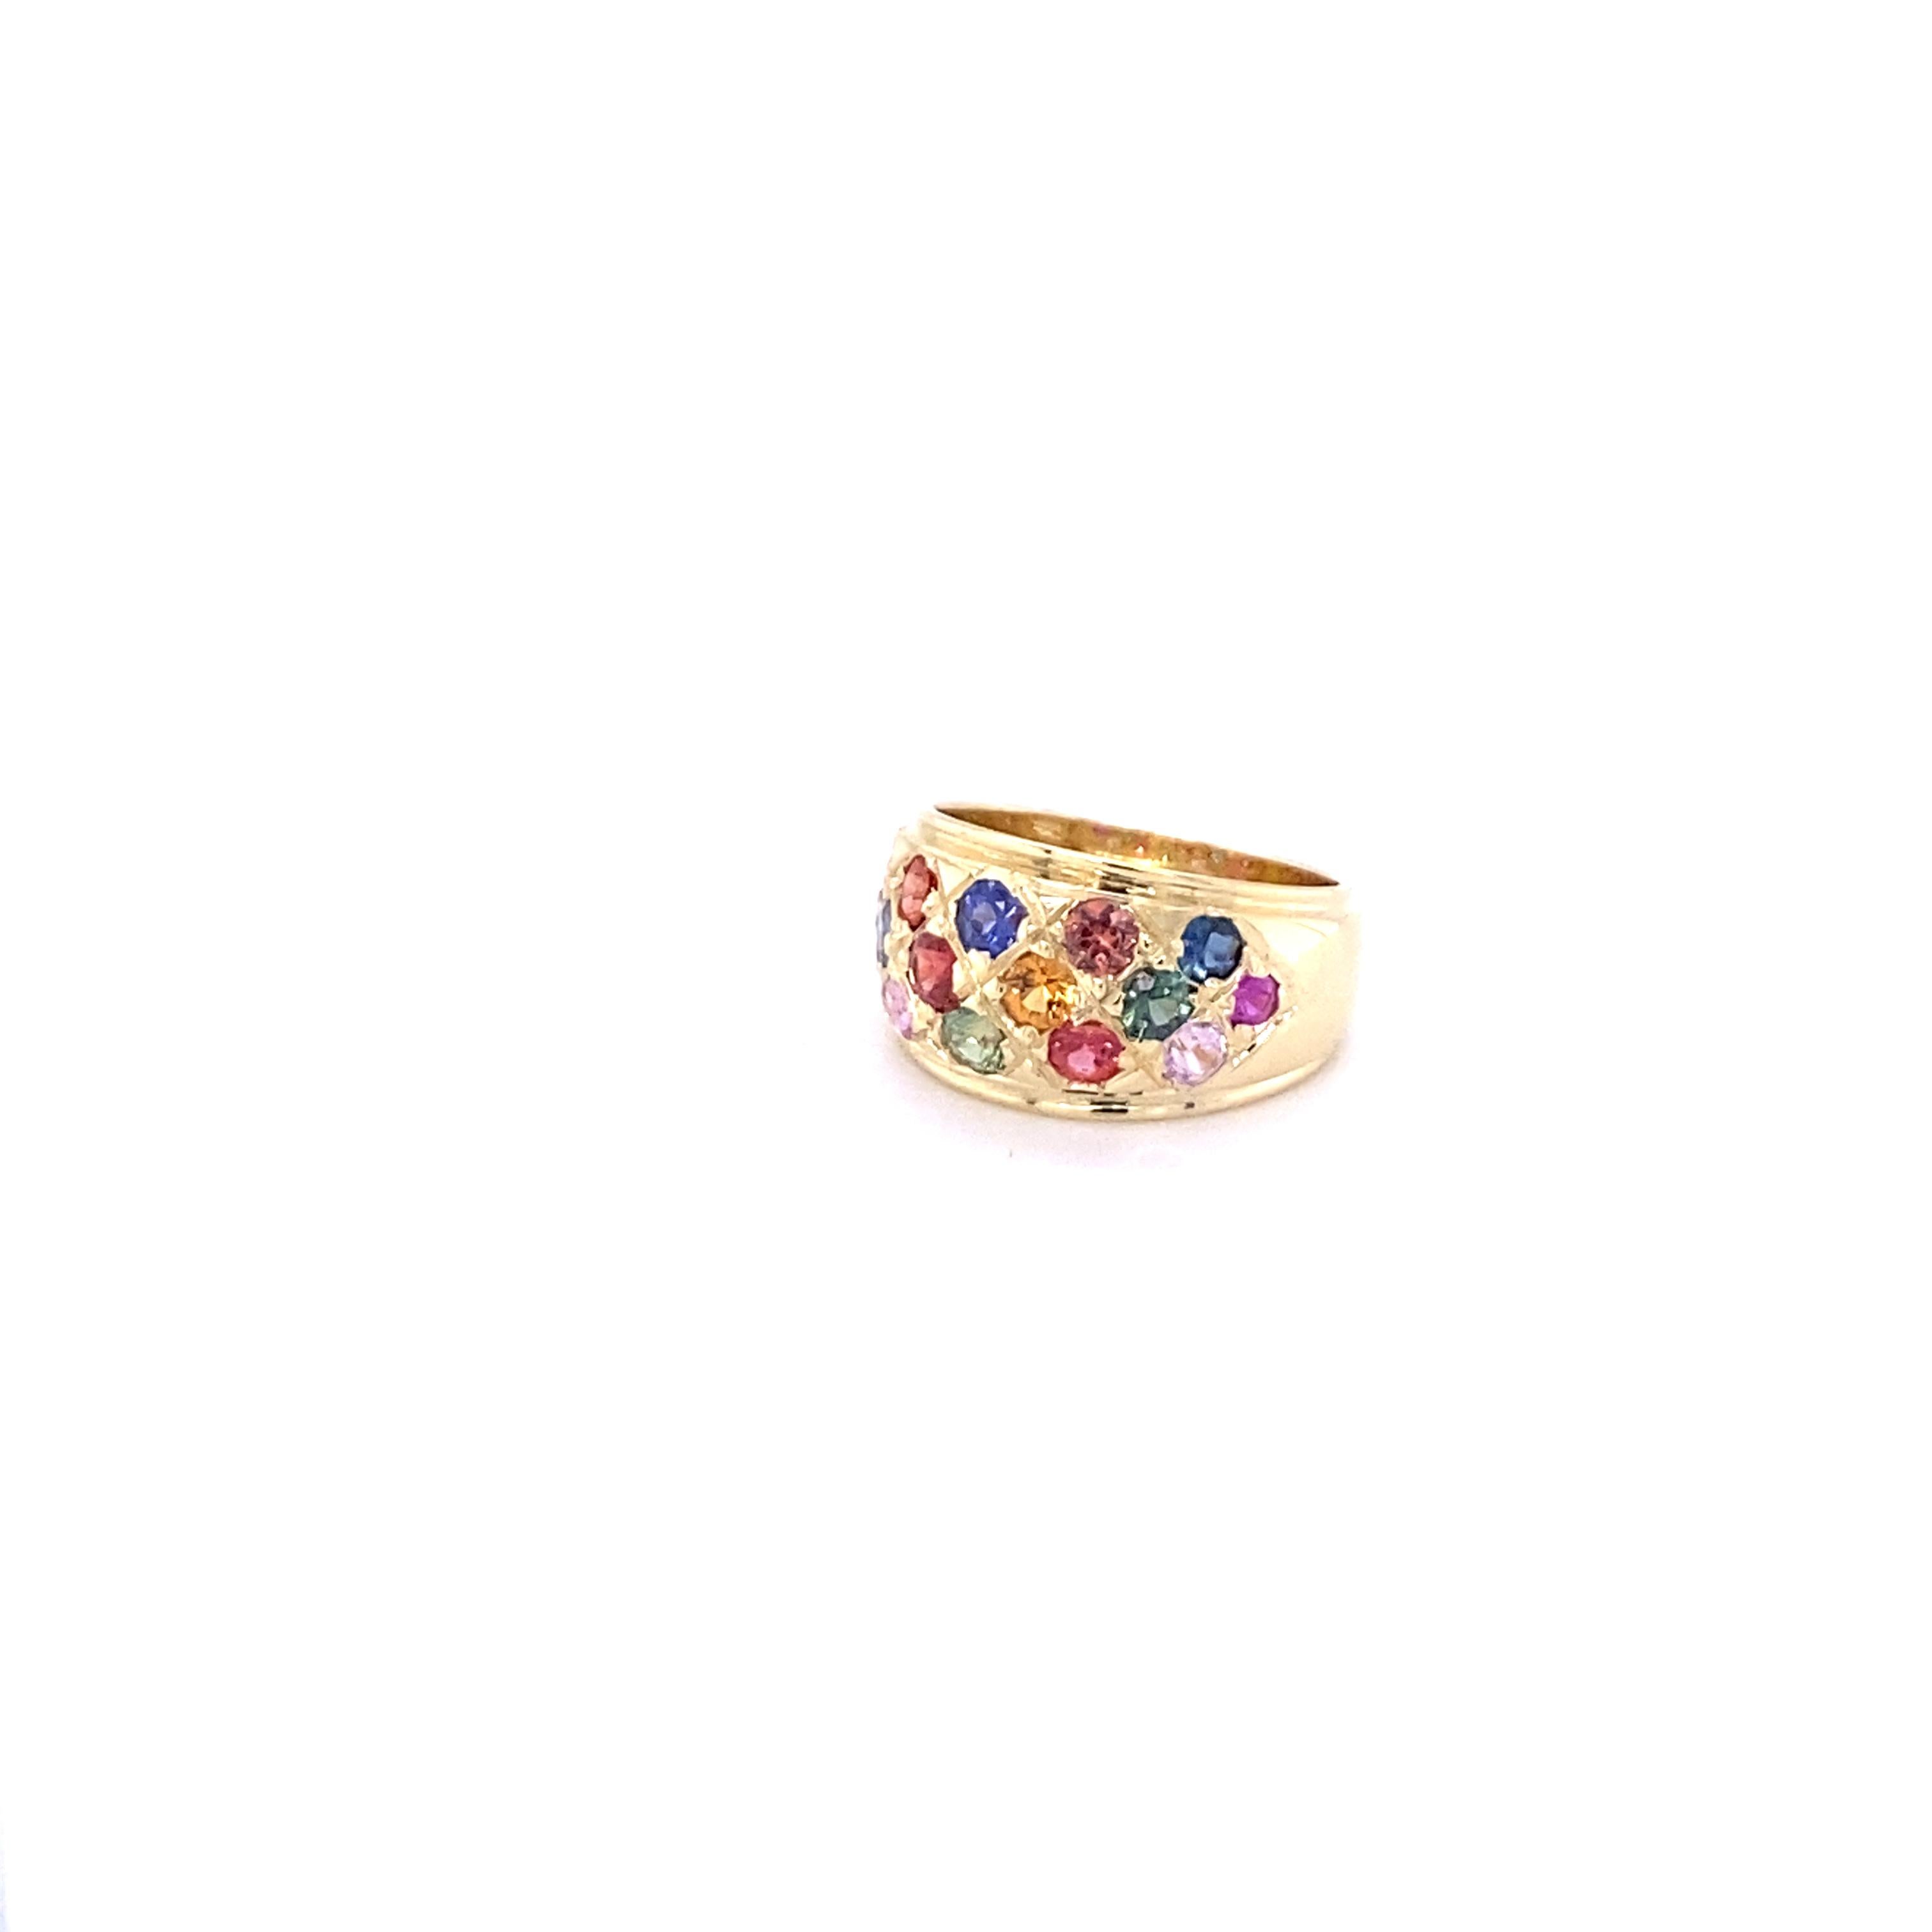 There are 16 Multicolored Natural Sapphires in this band that weigh 2.12 Carats.  It is made in 14K Yellow Gold and weighs approximately 7.0 Grams.

The band is a size 7 and can be re-sized at no additional charge.
This can be worn as an everyday